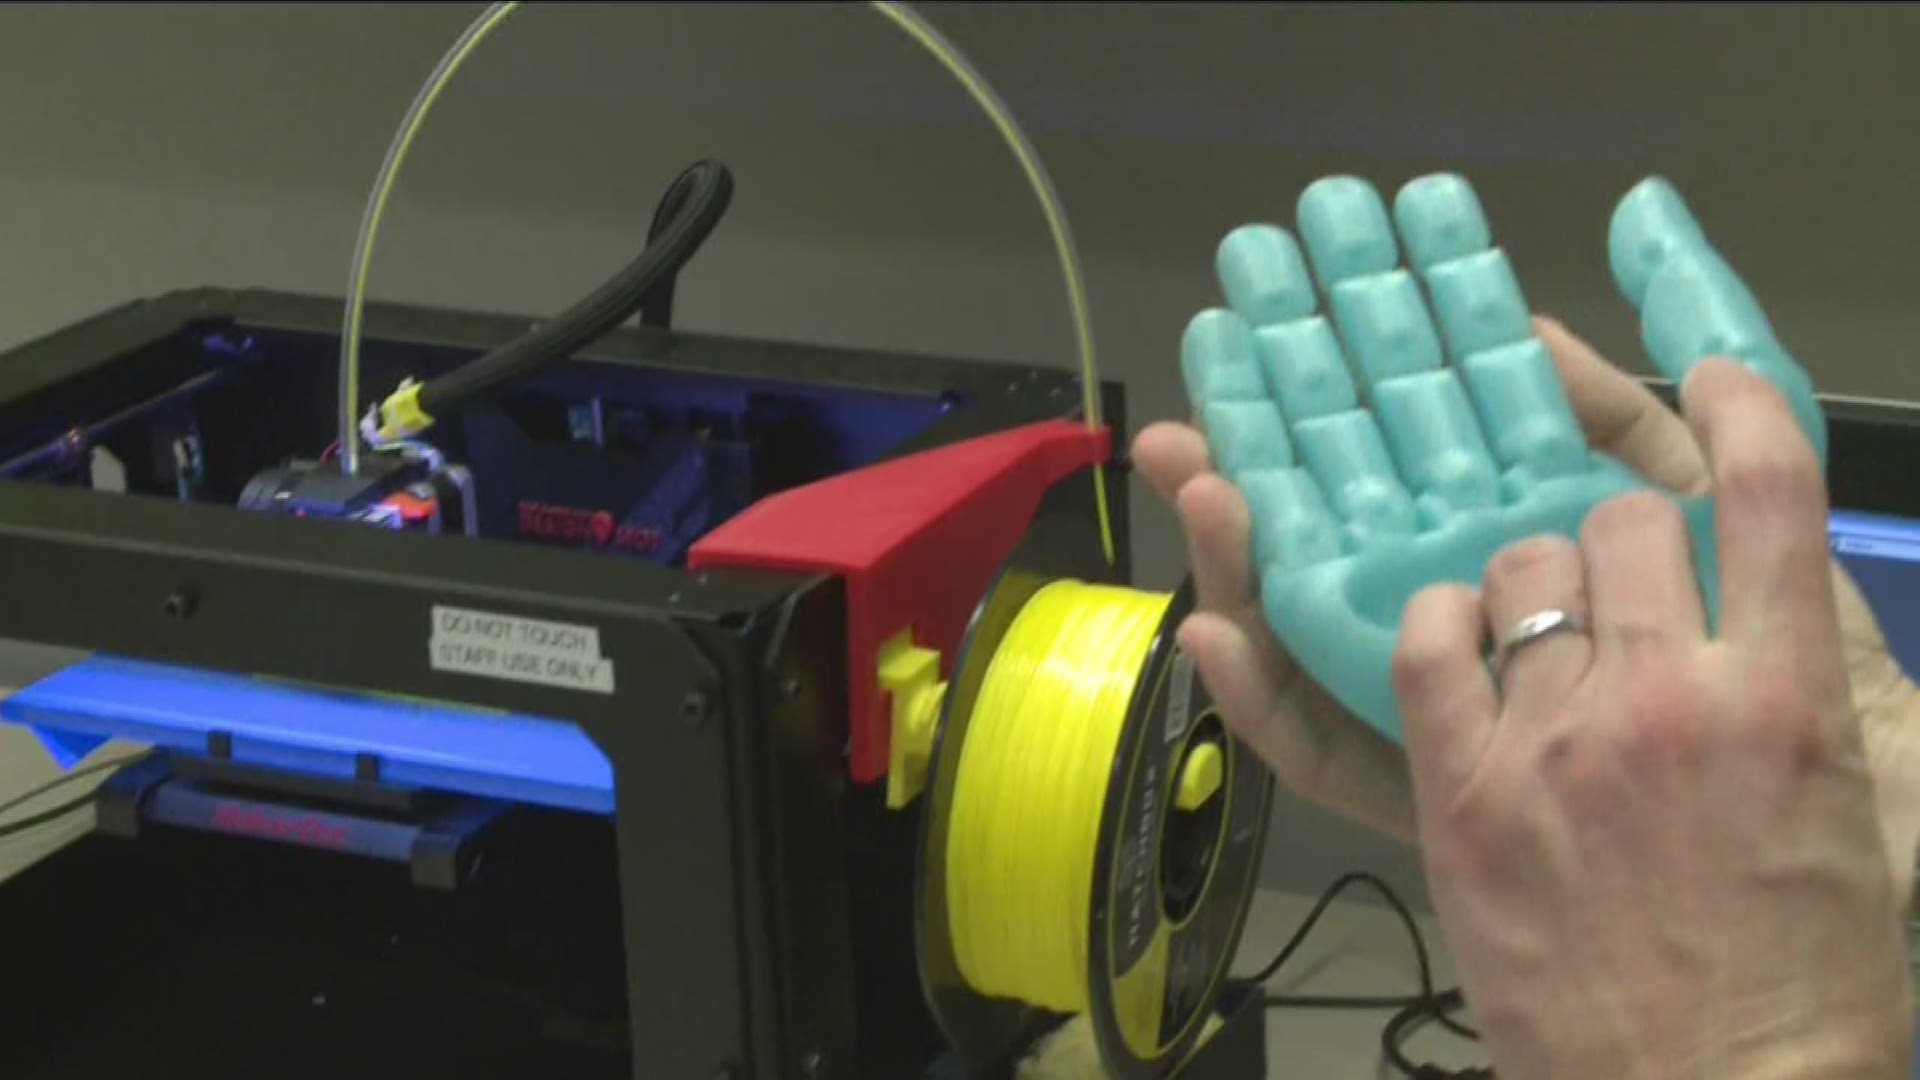 3D technology is changing lives. And residents have access to these devices at the Sacramento Public Library.   